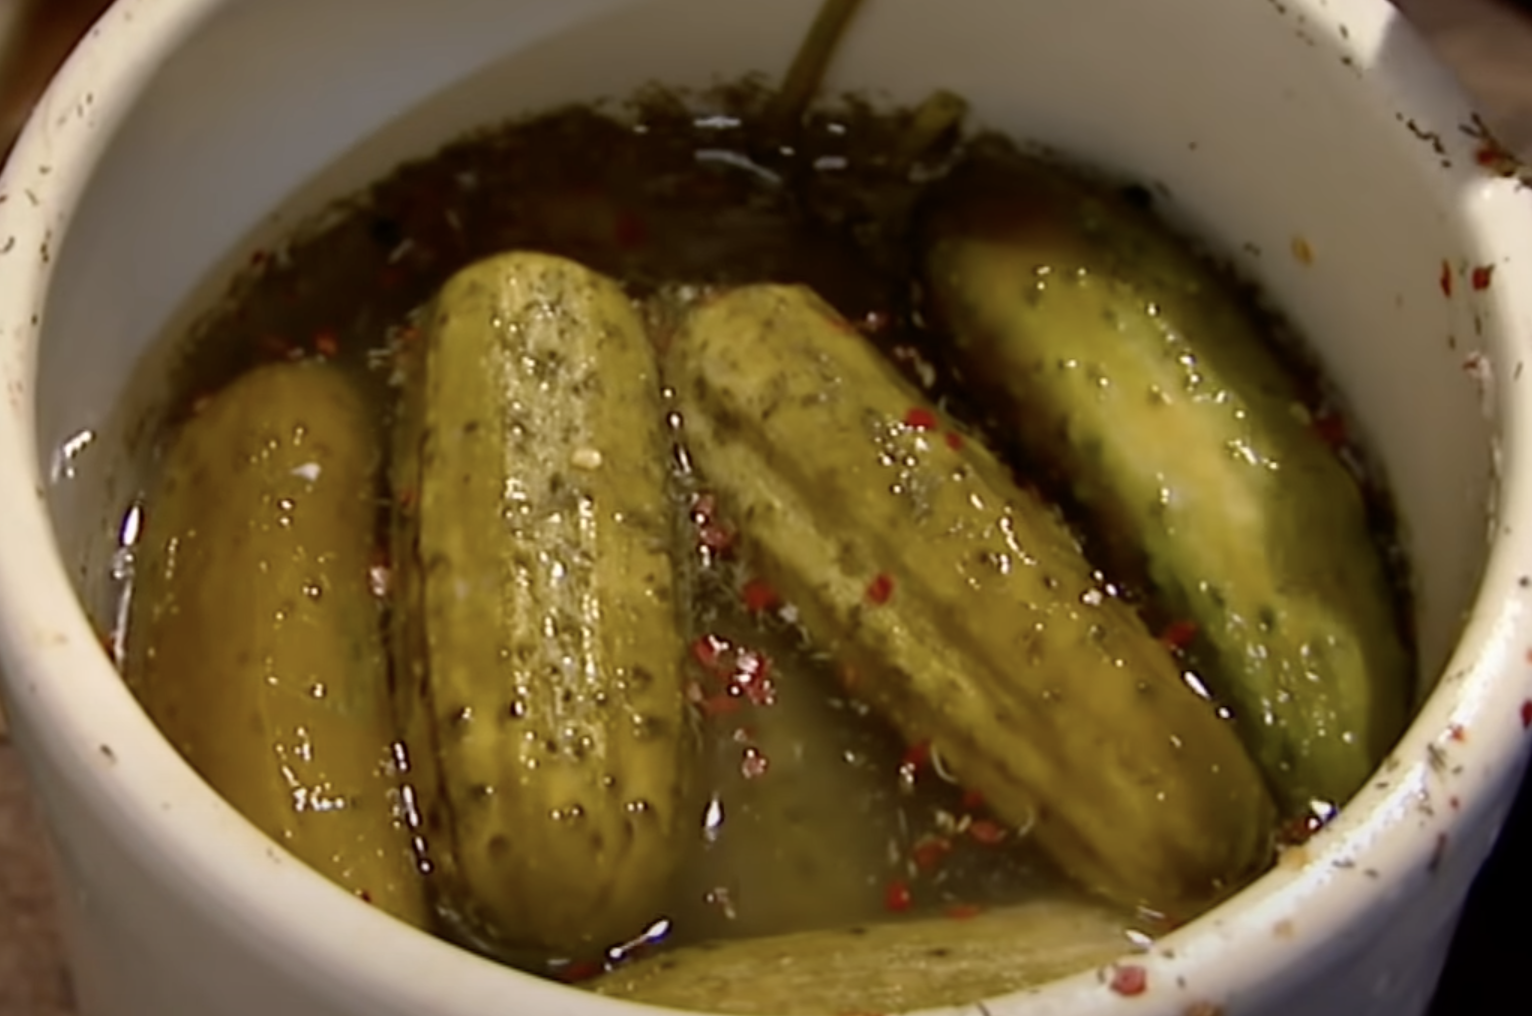 Pickles in a bowl